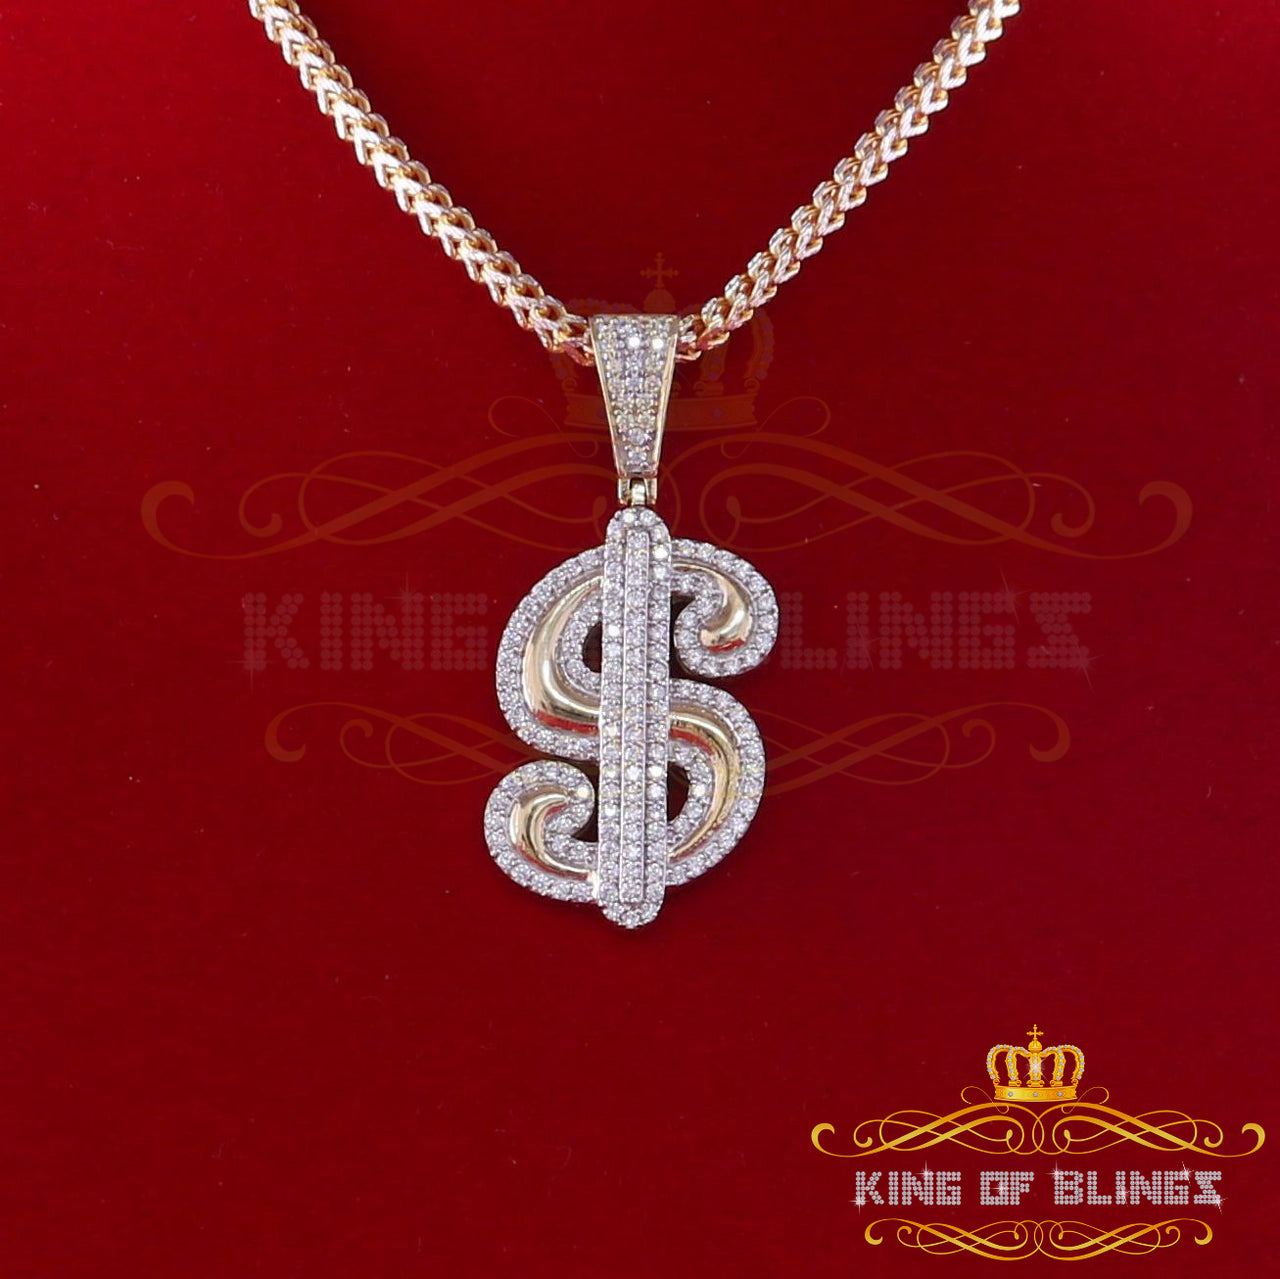 Yellow 925 Sterling Silver Dollar Sign Pendant with 3.05ct Cubic Zirconia Stone KING OF BLINGS